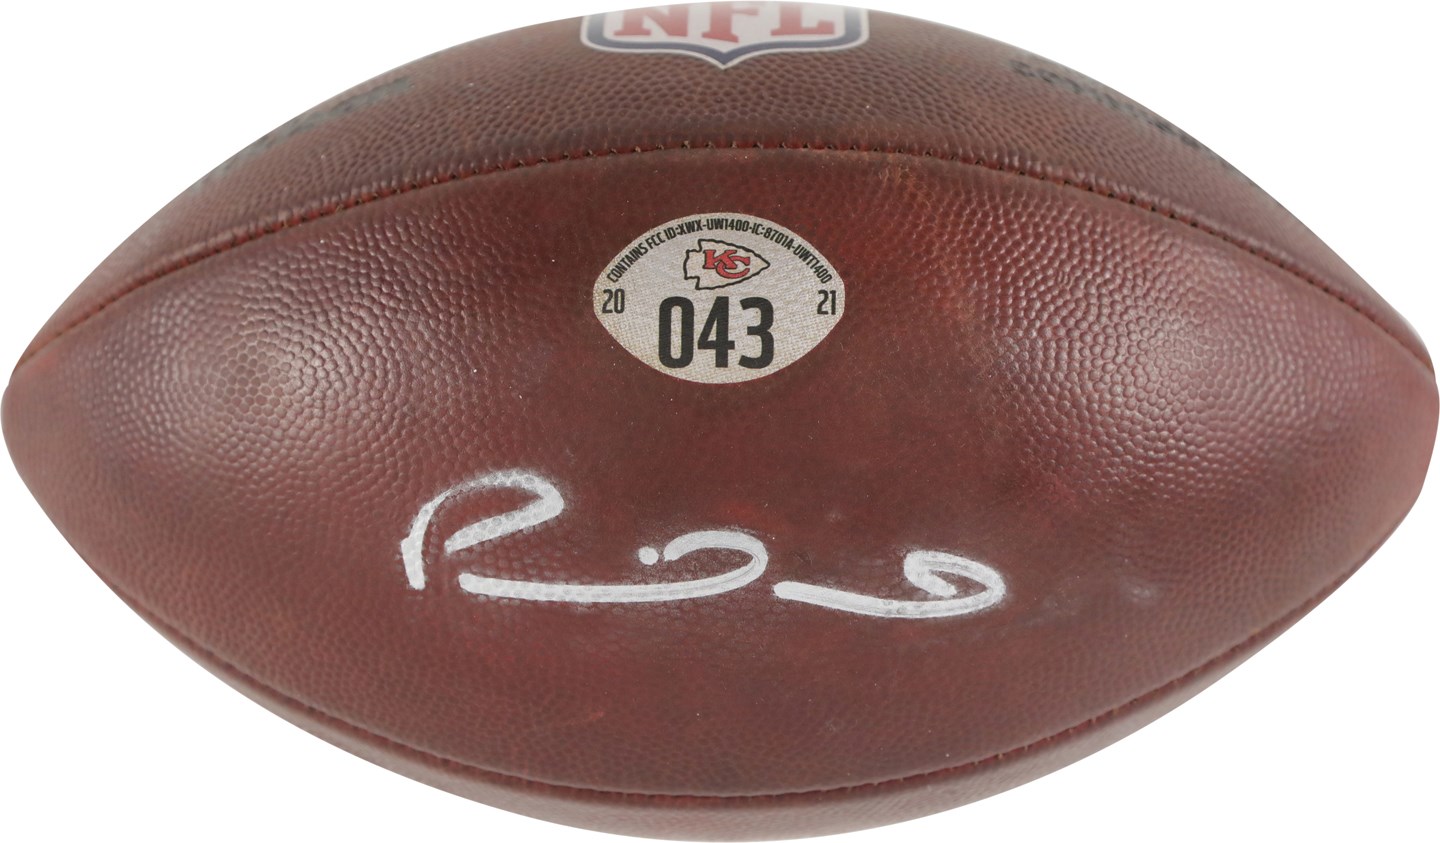 Football - /12/21 Patrick Mahomes Signed Game Used Rushing Touchdown Football for the First Kansas City Chiefs Touchdown of the Season! (Resolution Photomatching & Chiefs LOA)